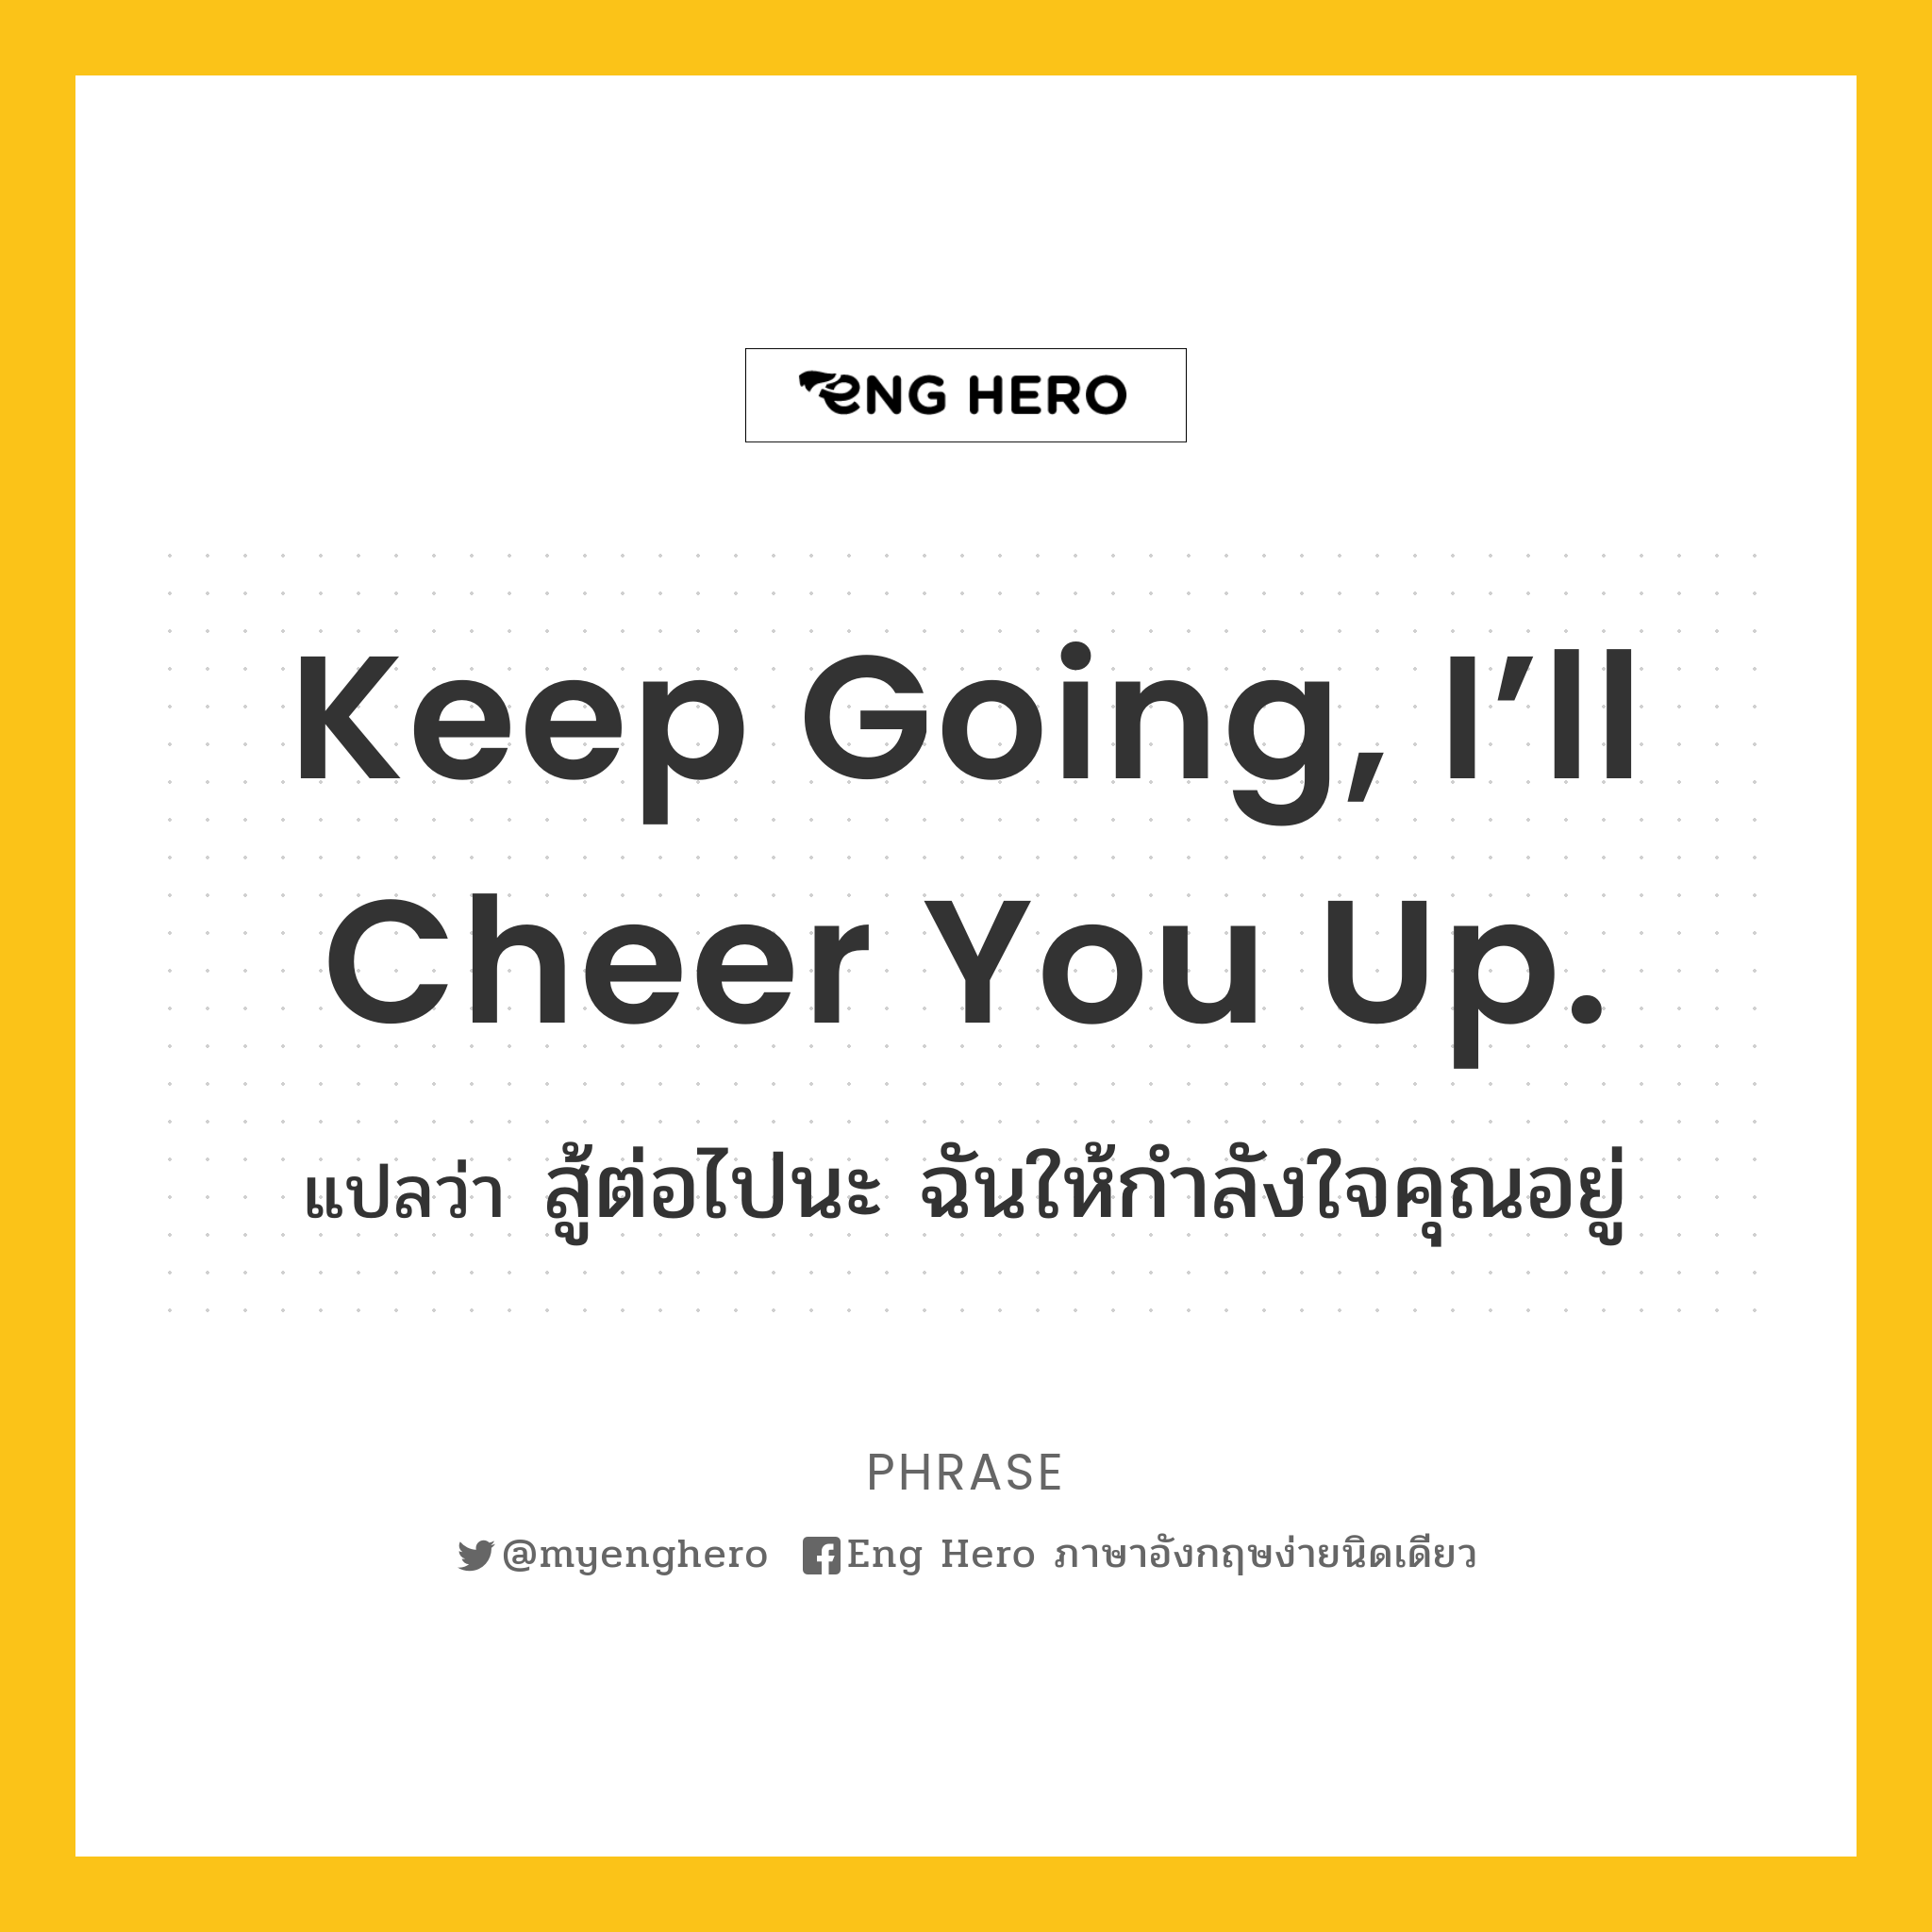 Keep going, I’ll cheer you up.